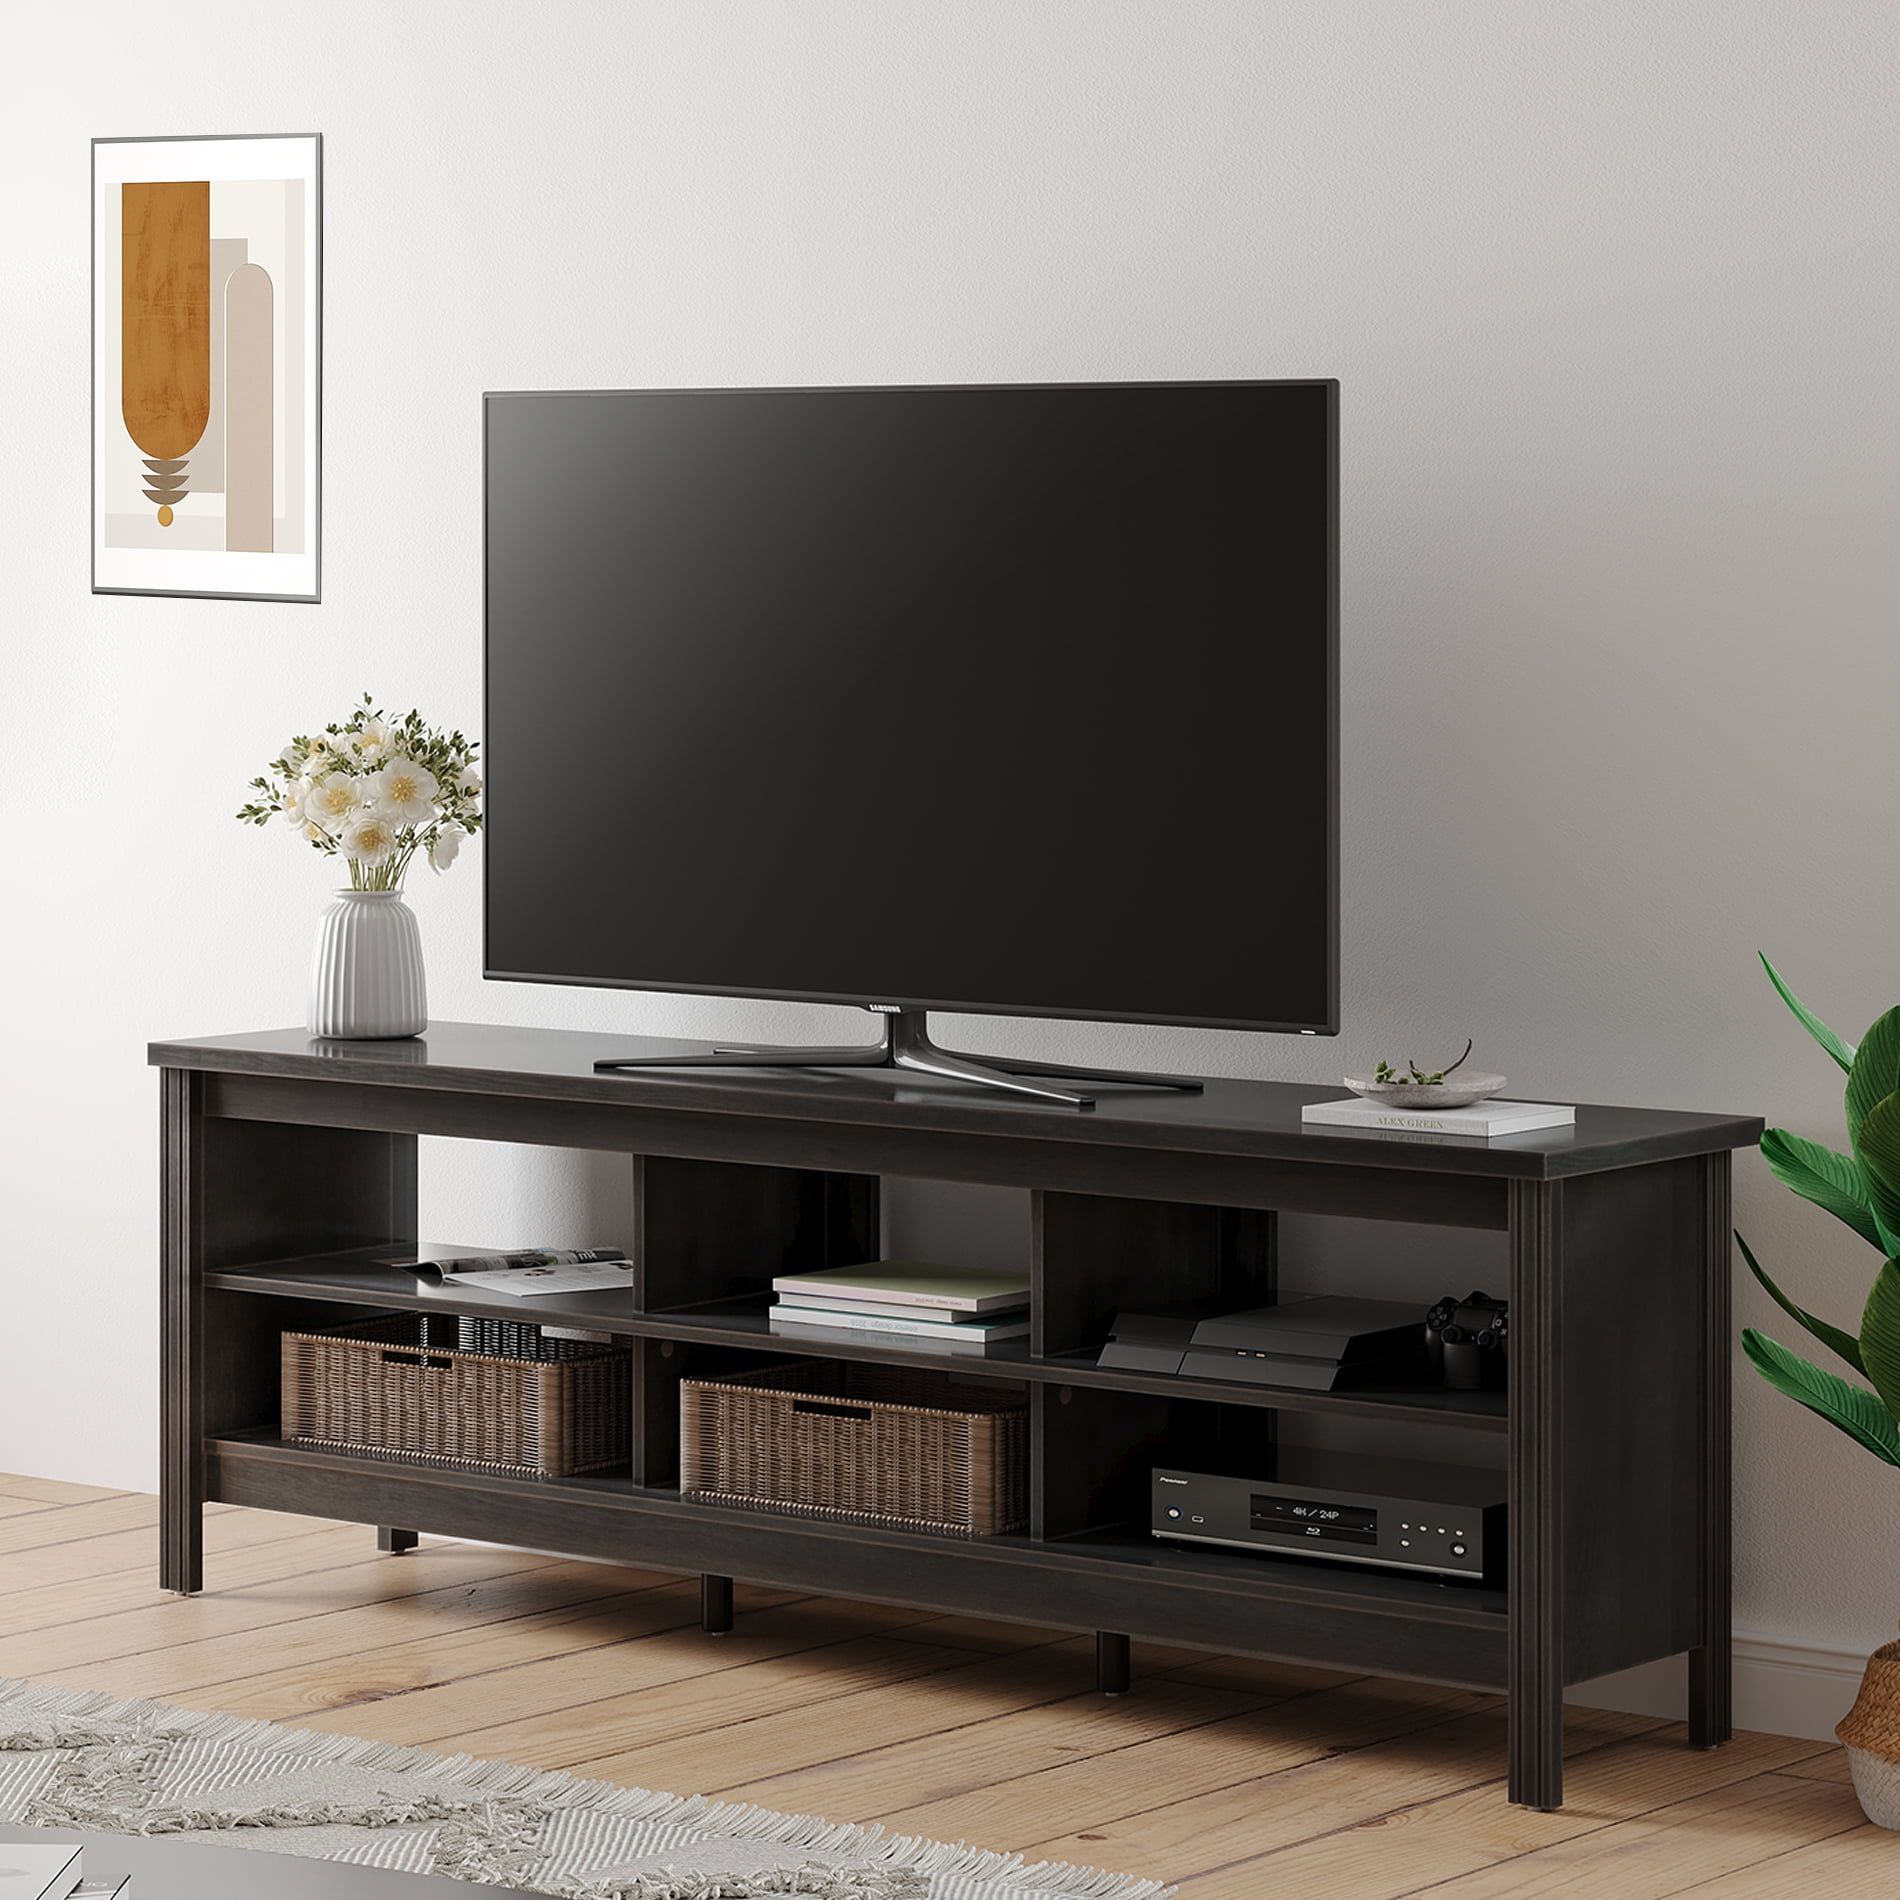 Farmhouse Tv Stand For Tvs Up To 75" Tv Entertainment Center Media Intended For Farmhouse Tv Stands For 70 Inch Tv (Gallery 7 of 20)